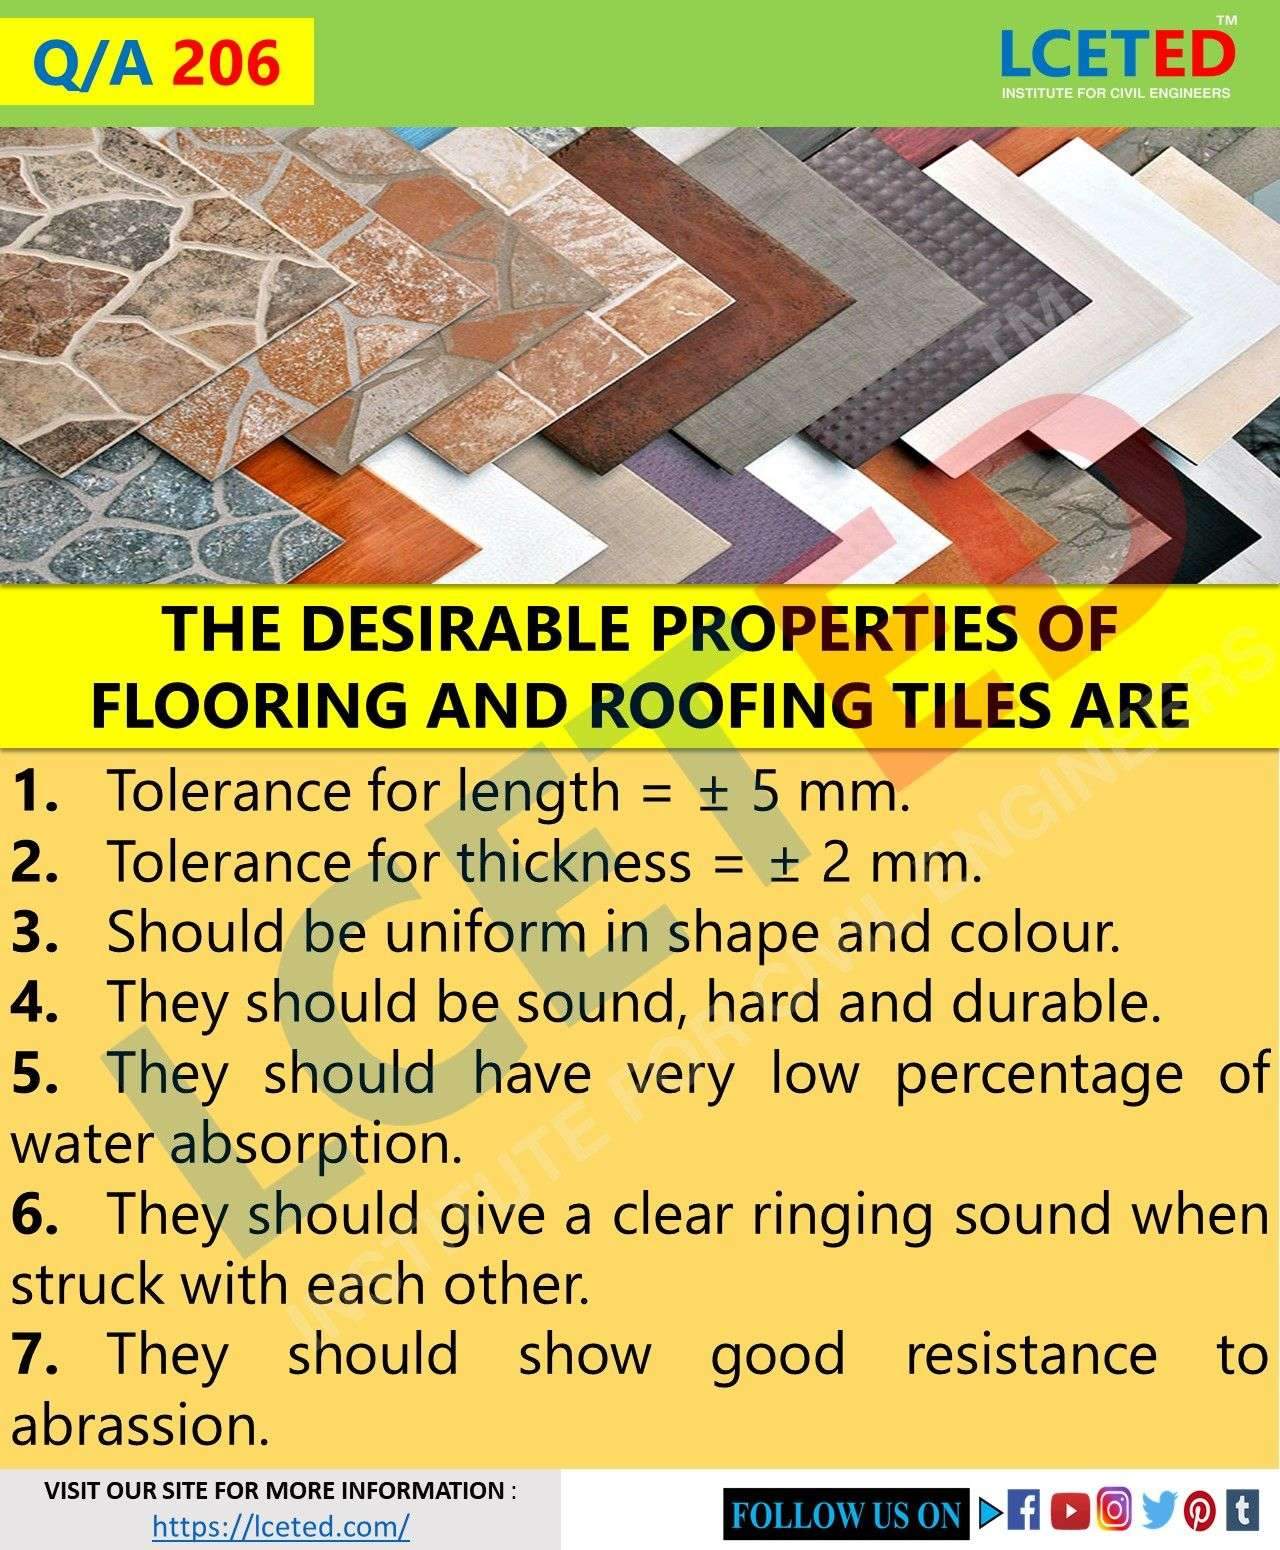 Q/A 206: PROPERTIES OF FLOORING AND ROOFING TILES